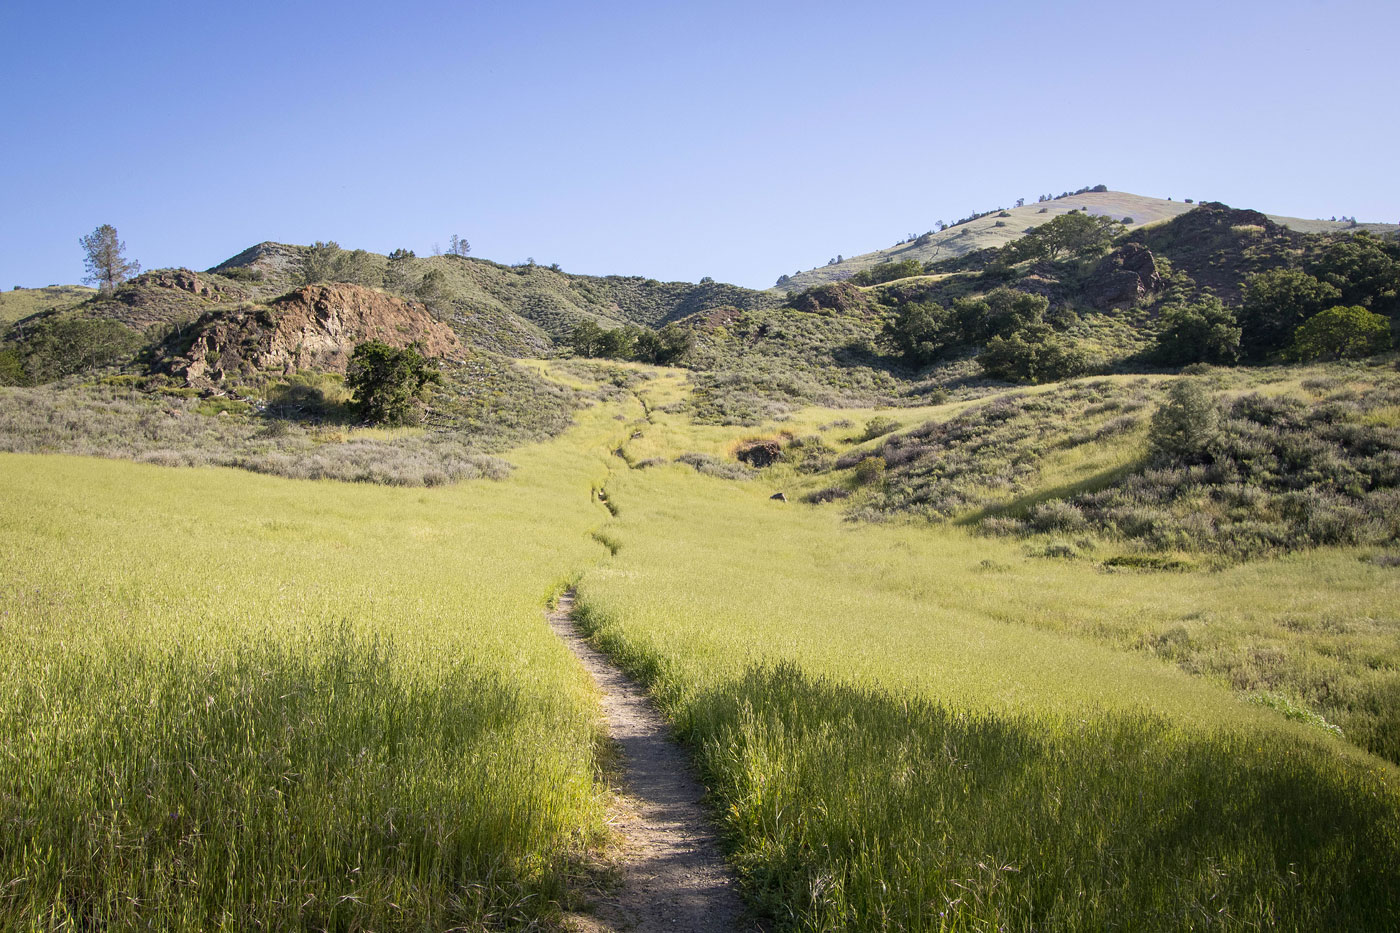 Hike Zaca Peak via Grass Mountain Trail in Los Padres National Forest, California - Stav is Lost